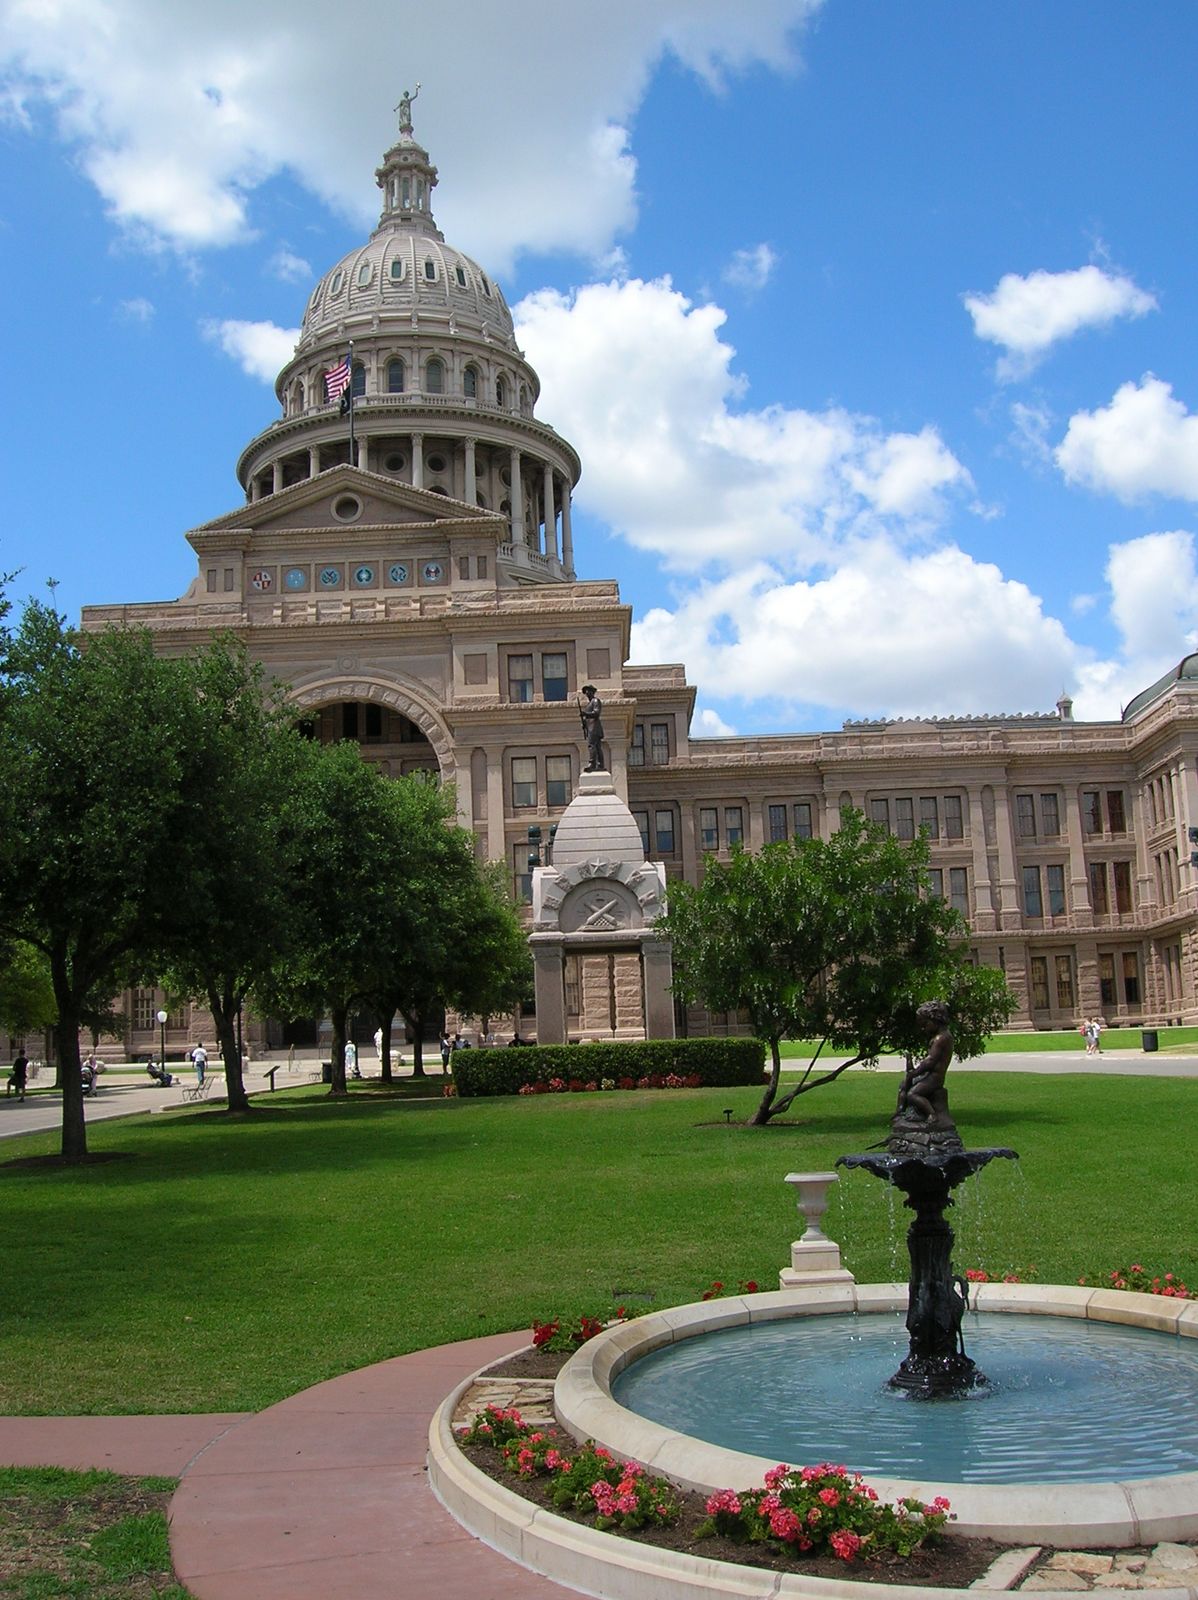 The Capital Building in Austin, Texas. Courtesy of freeimages.com.